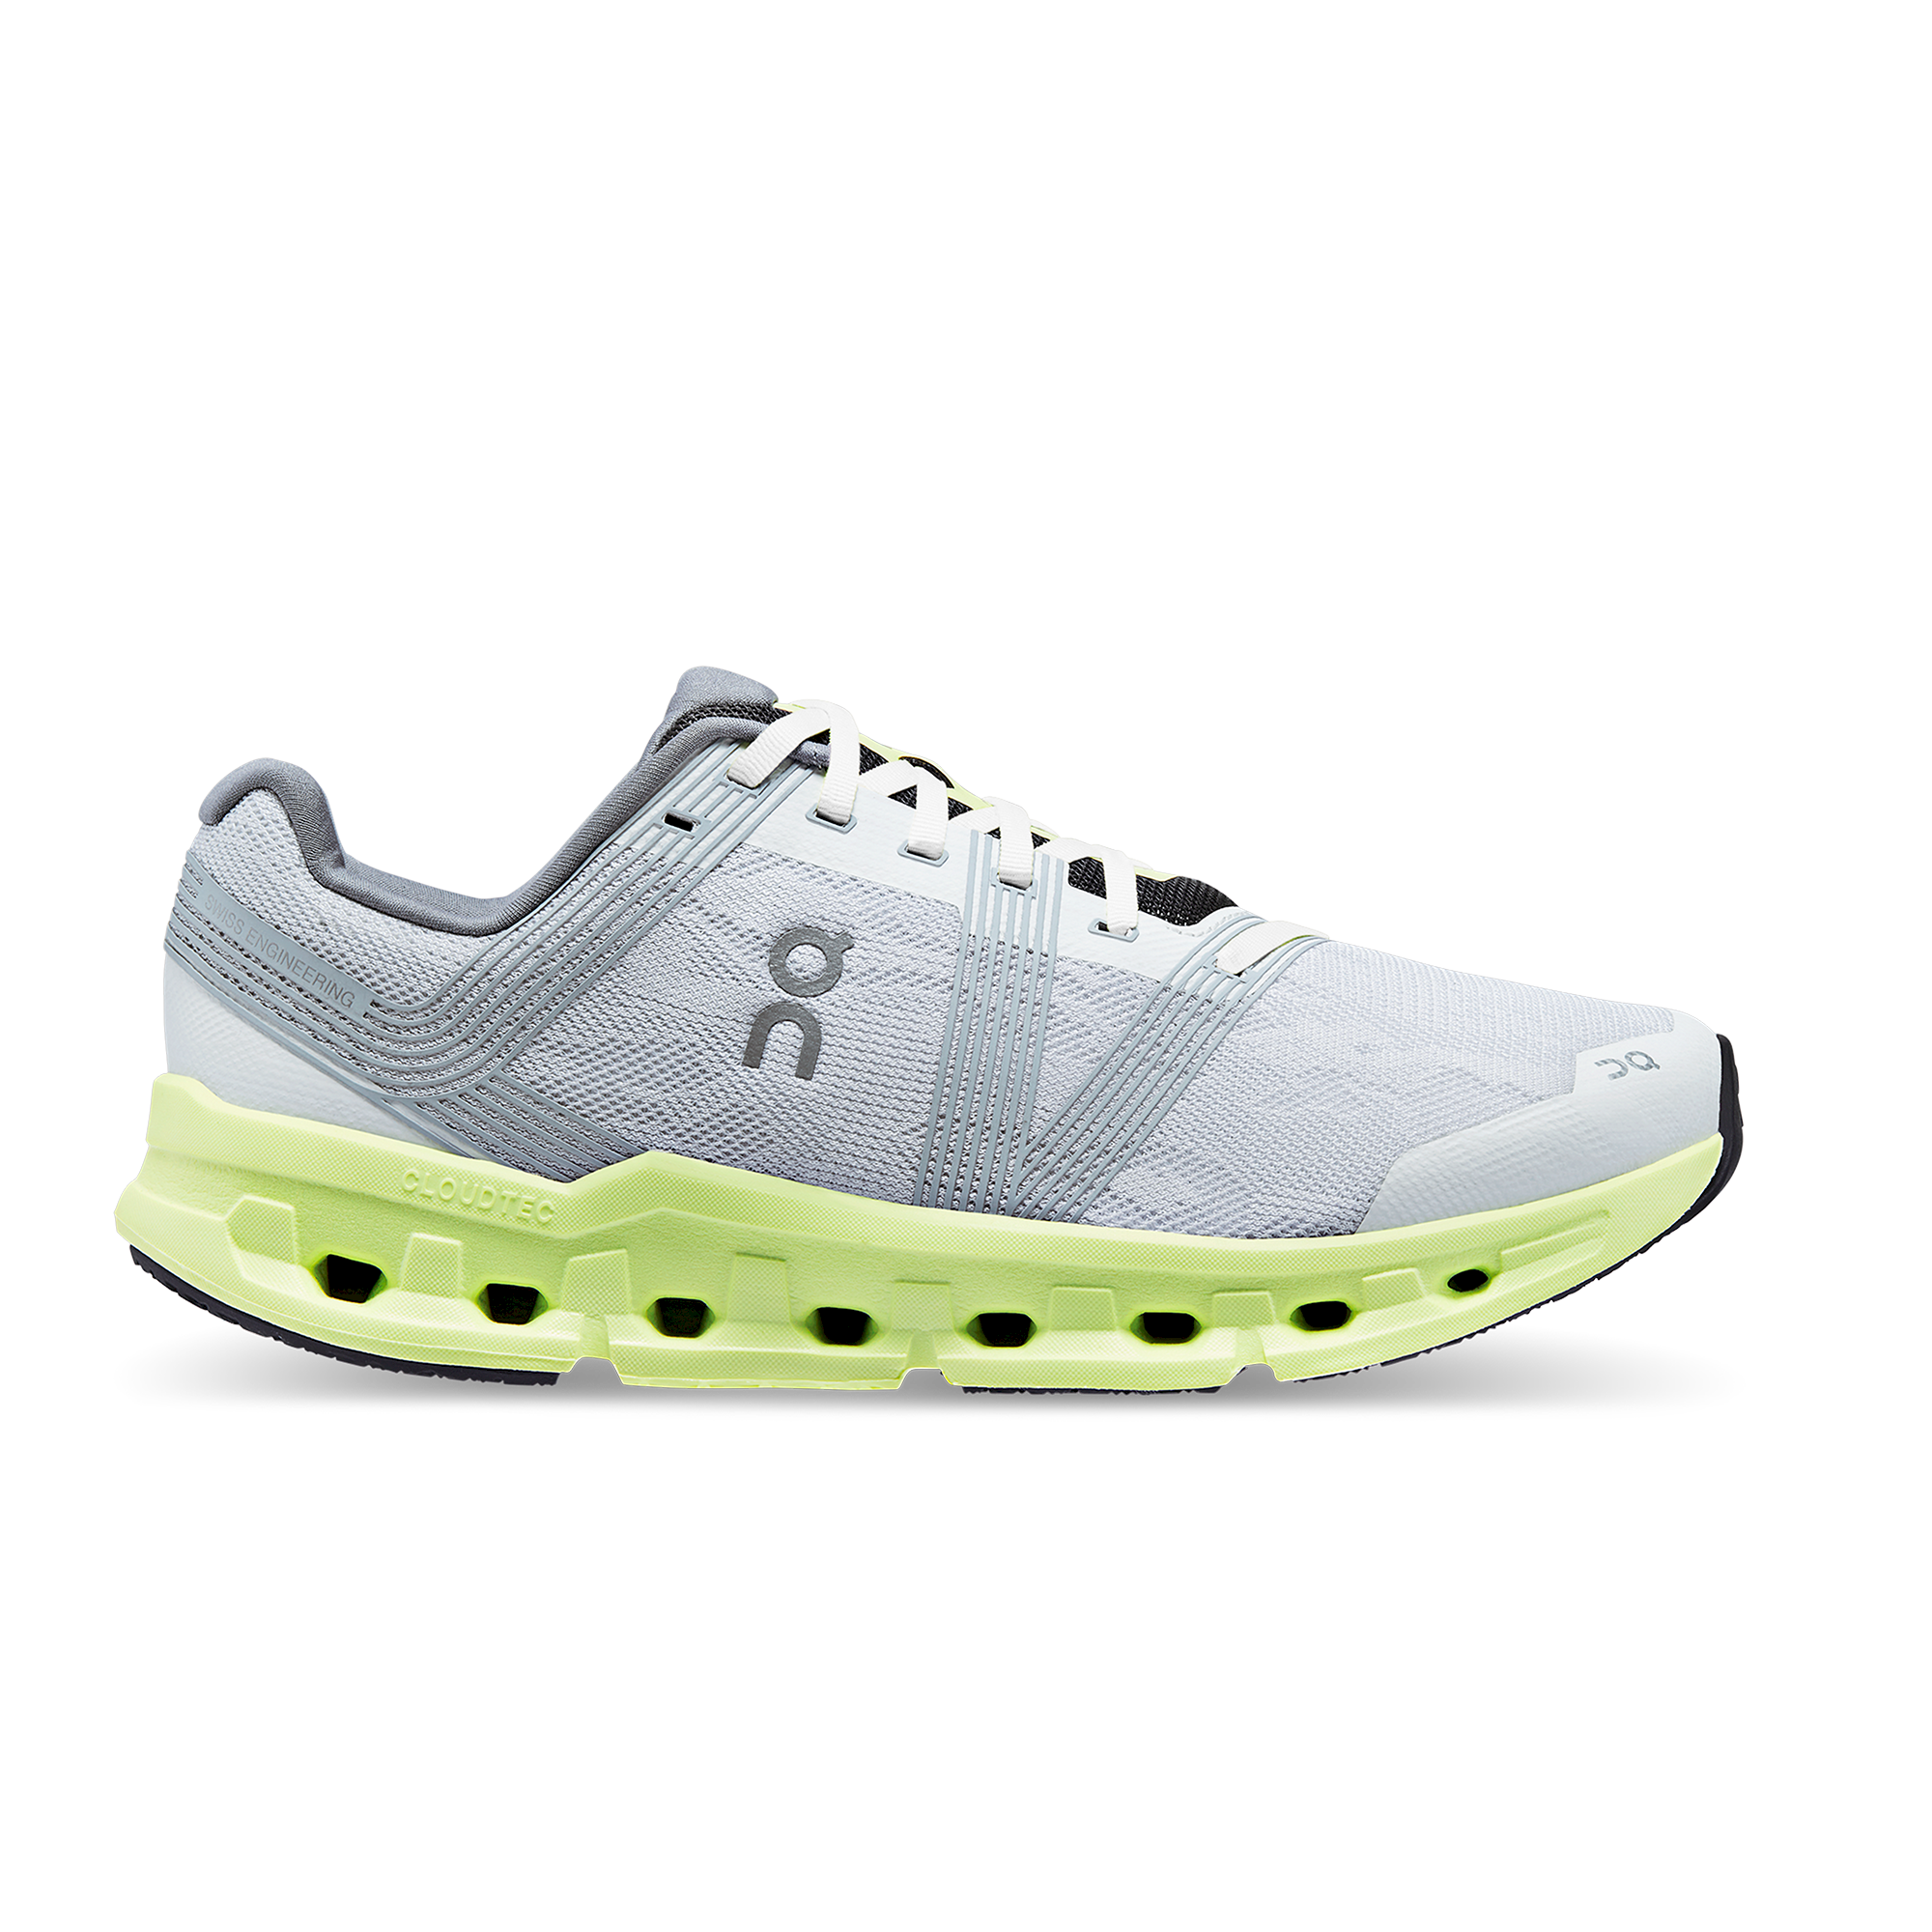 On-running sneakers Cloudstratus 3 gray color 3MD30111234 buy on PRM